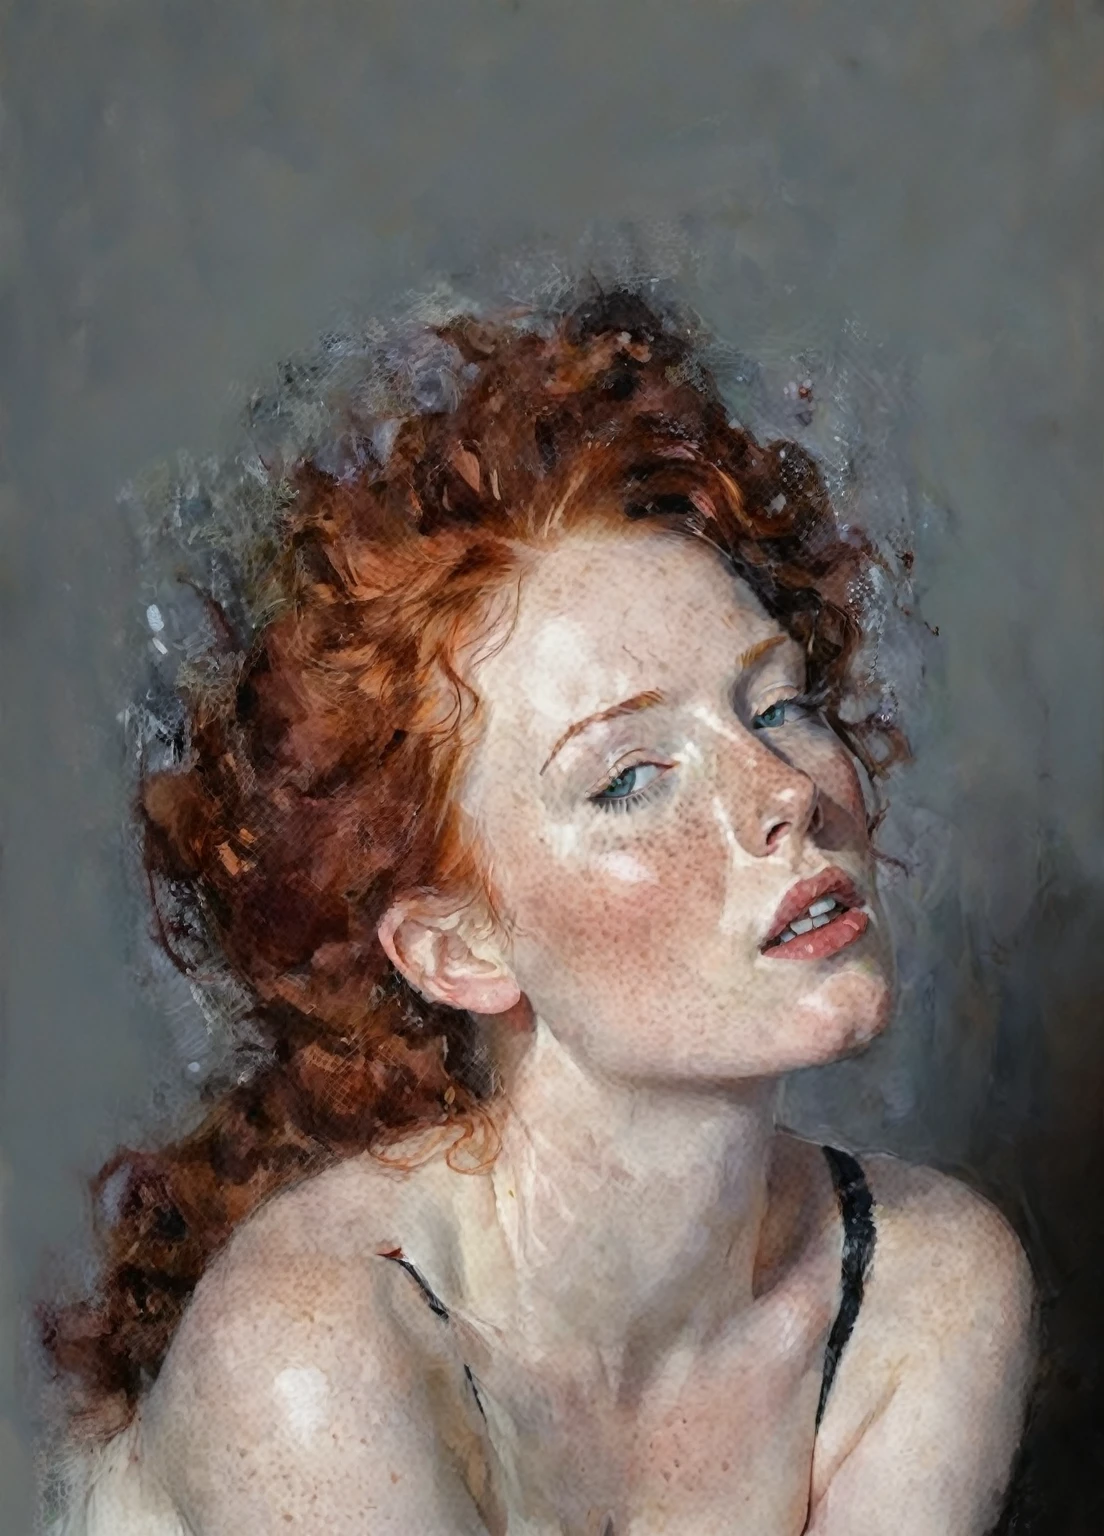 painting of a redheaded woman with red hair and a black bra, redhead with freckles, with pale skin, red hair and freckles, pale and freckled skin, redhead woman, pale and fair skin!!, redhead and fur, red head, with curly red hair, redhead, a young redhead, with freckles, white skin muy muy pálida, chica pelirroja